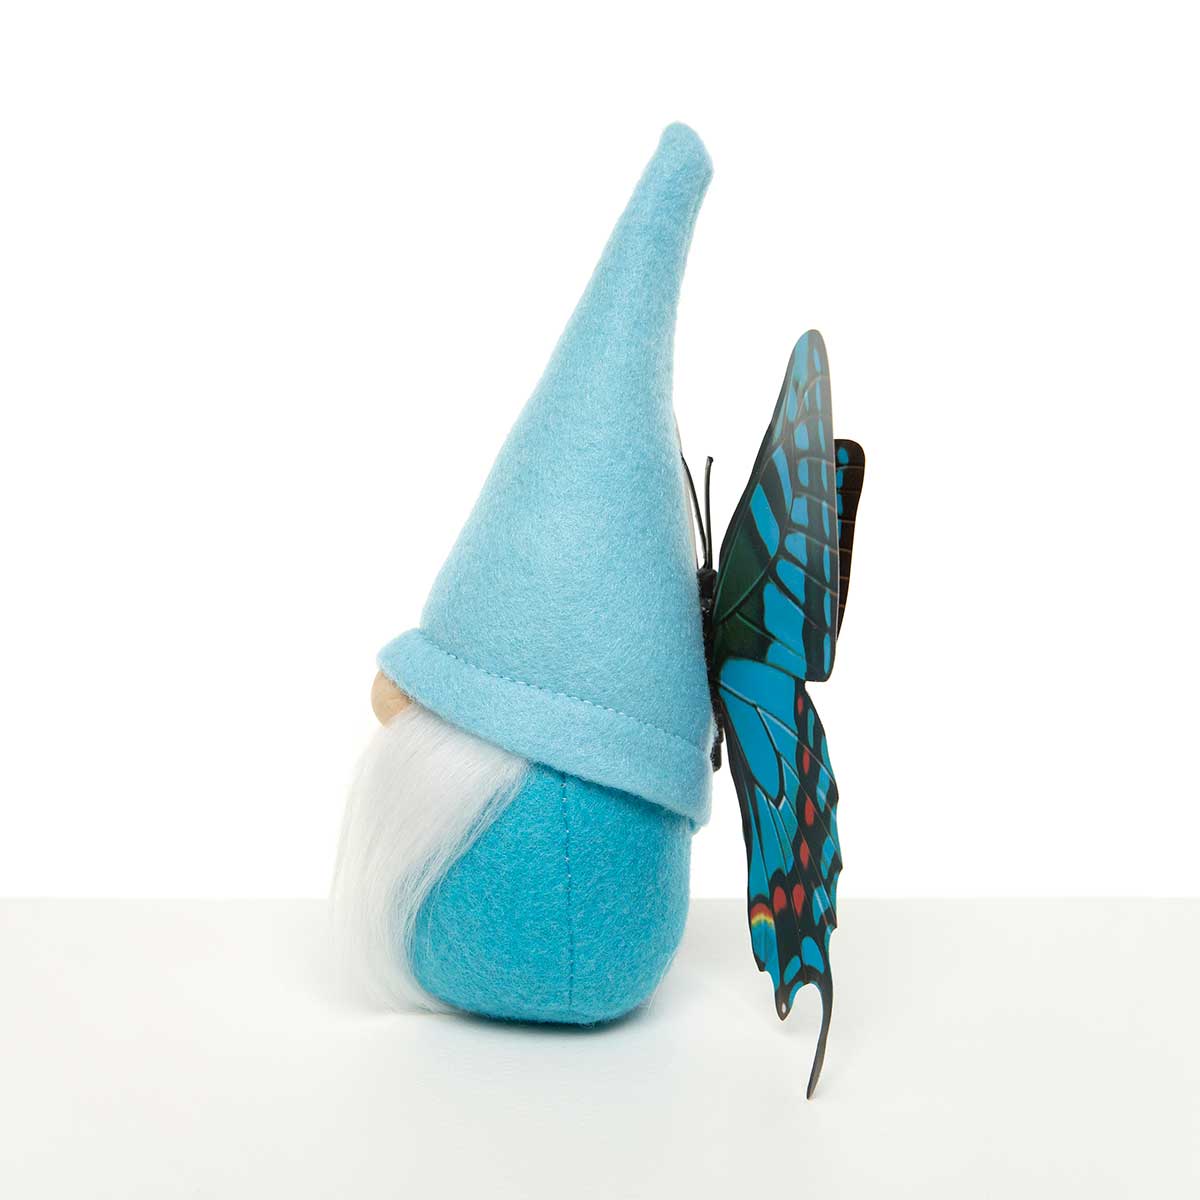 b50 BUTTERFLY GNOME BLUE WITH WINGS SMALL 6"X2.75"X7"